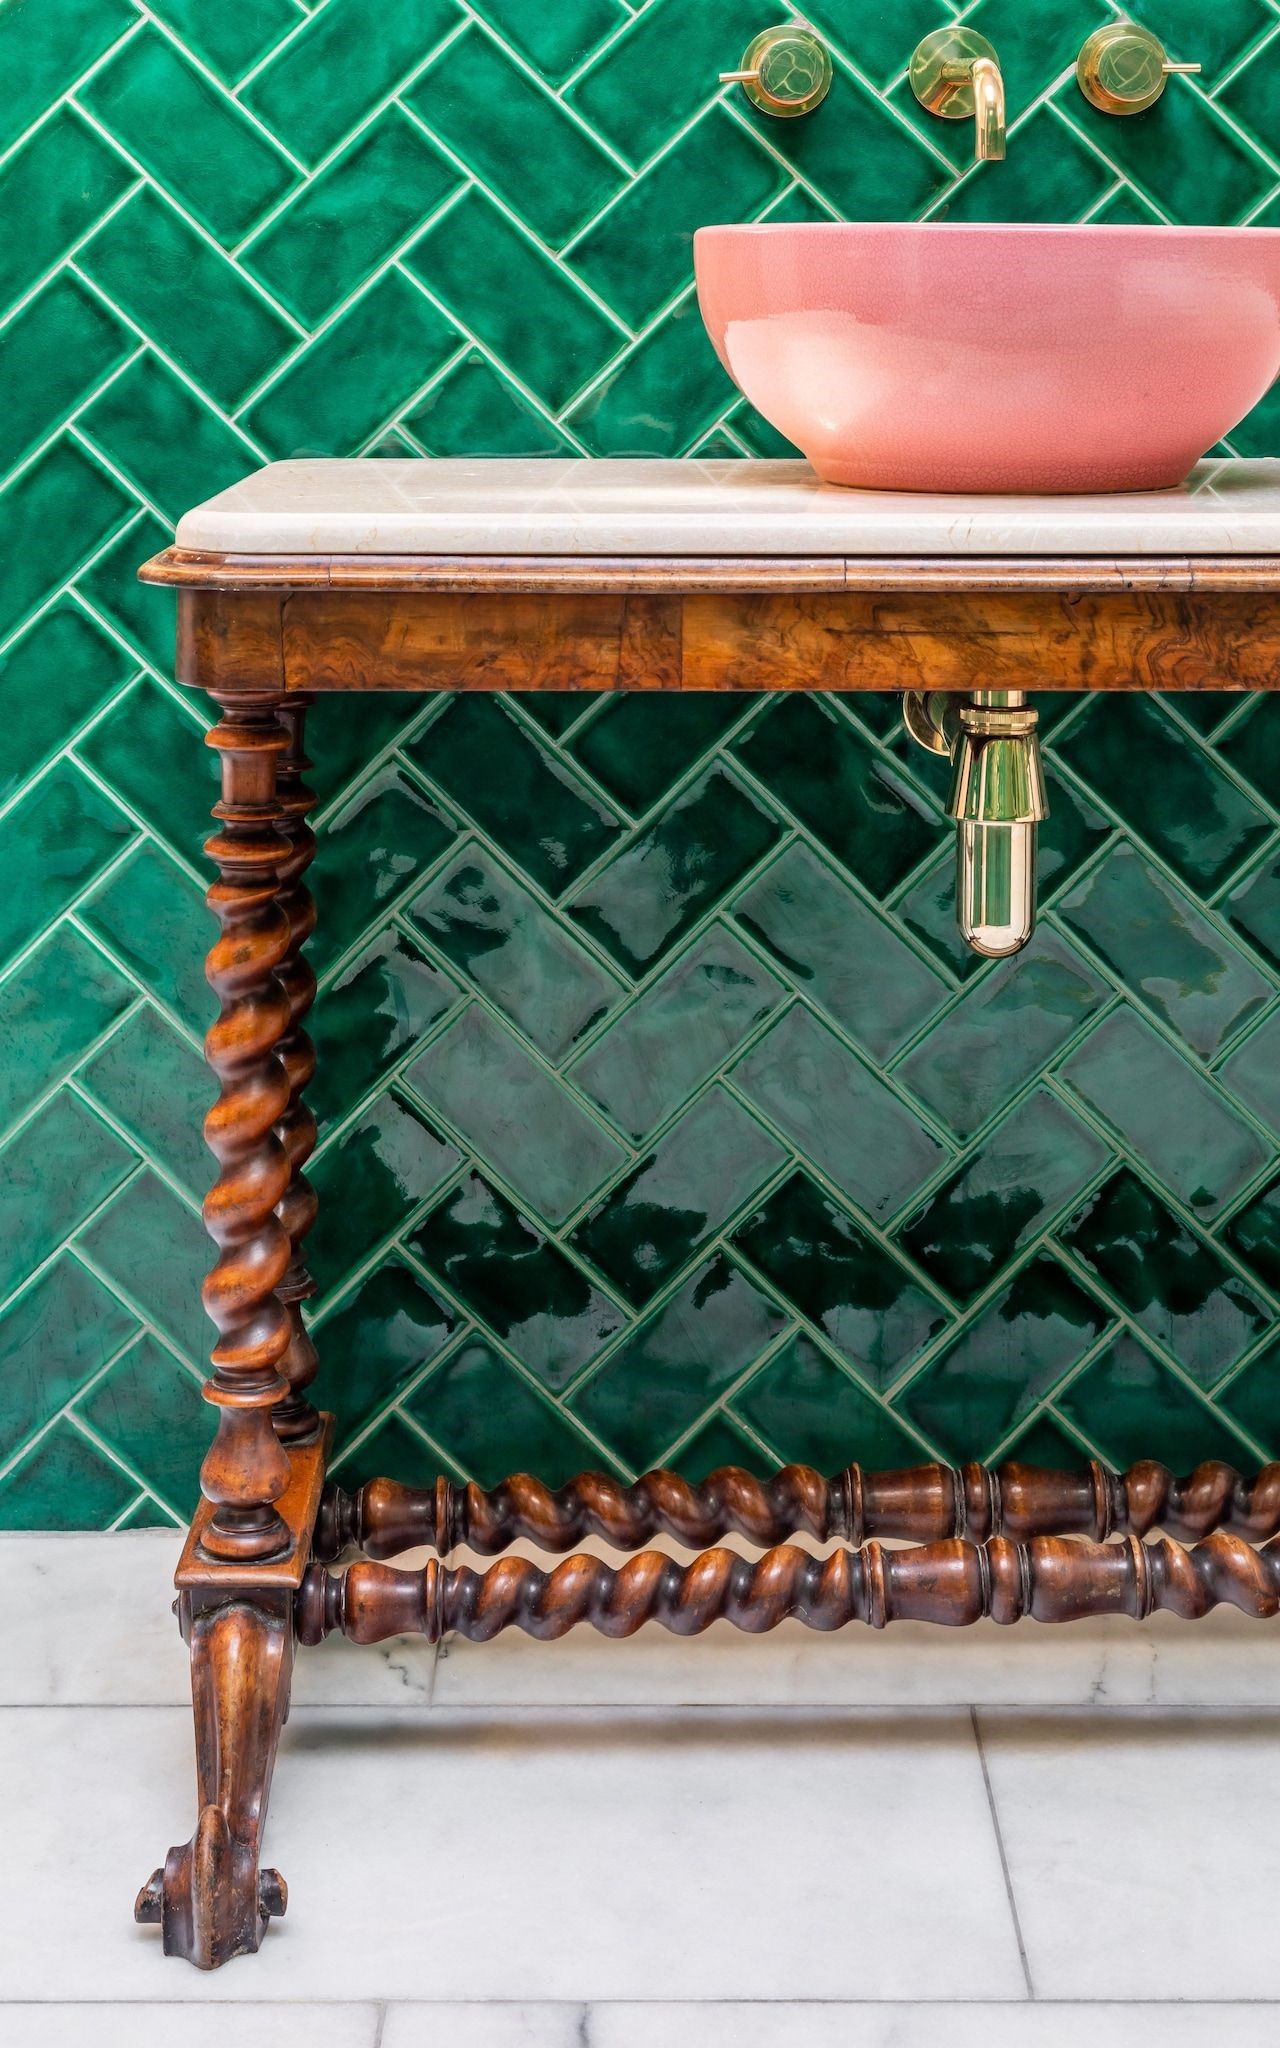 Close up image of an ornate brown wooden washbasin stand